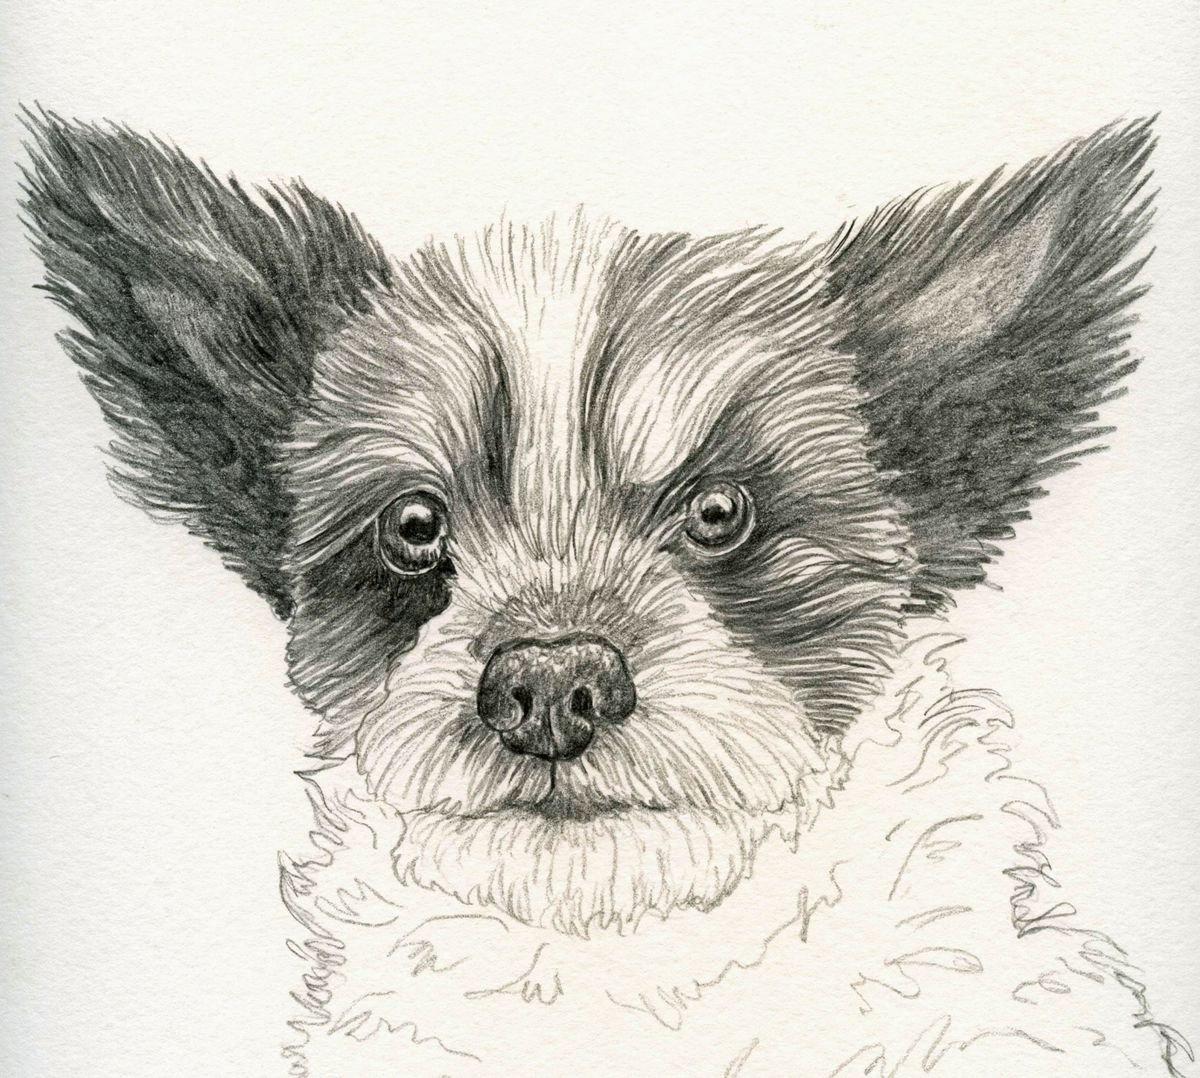 Black and White Terrier Mix Study Dog Art Original Graphite Pencil Drawing 8 x 9 Inches-Ca... by carla smale